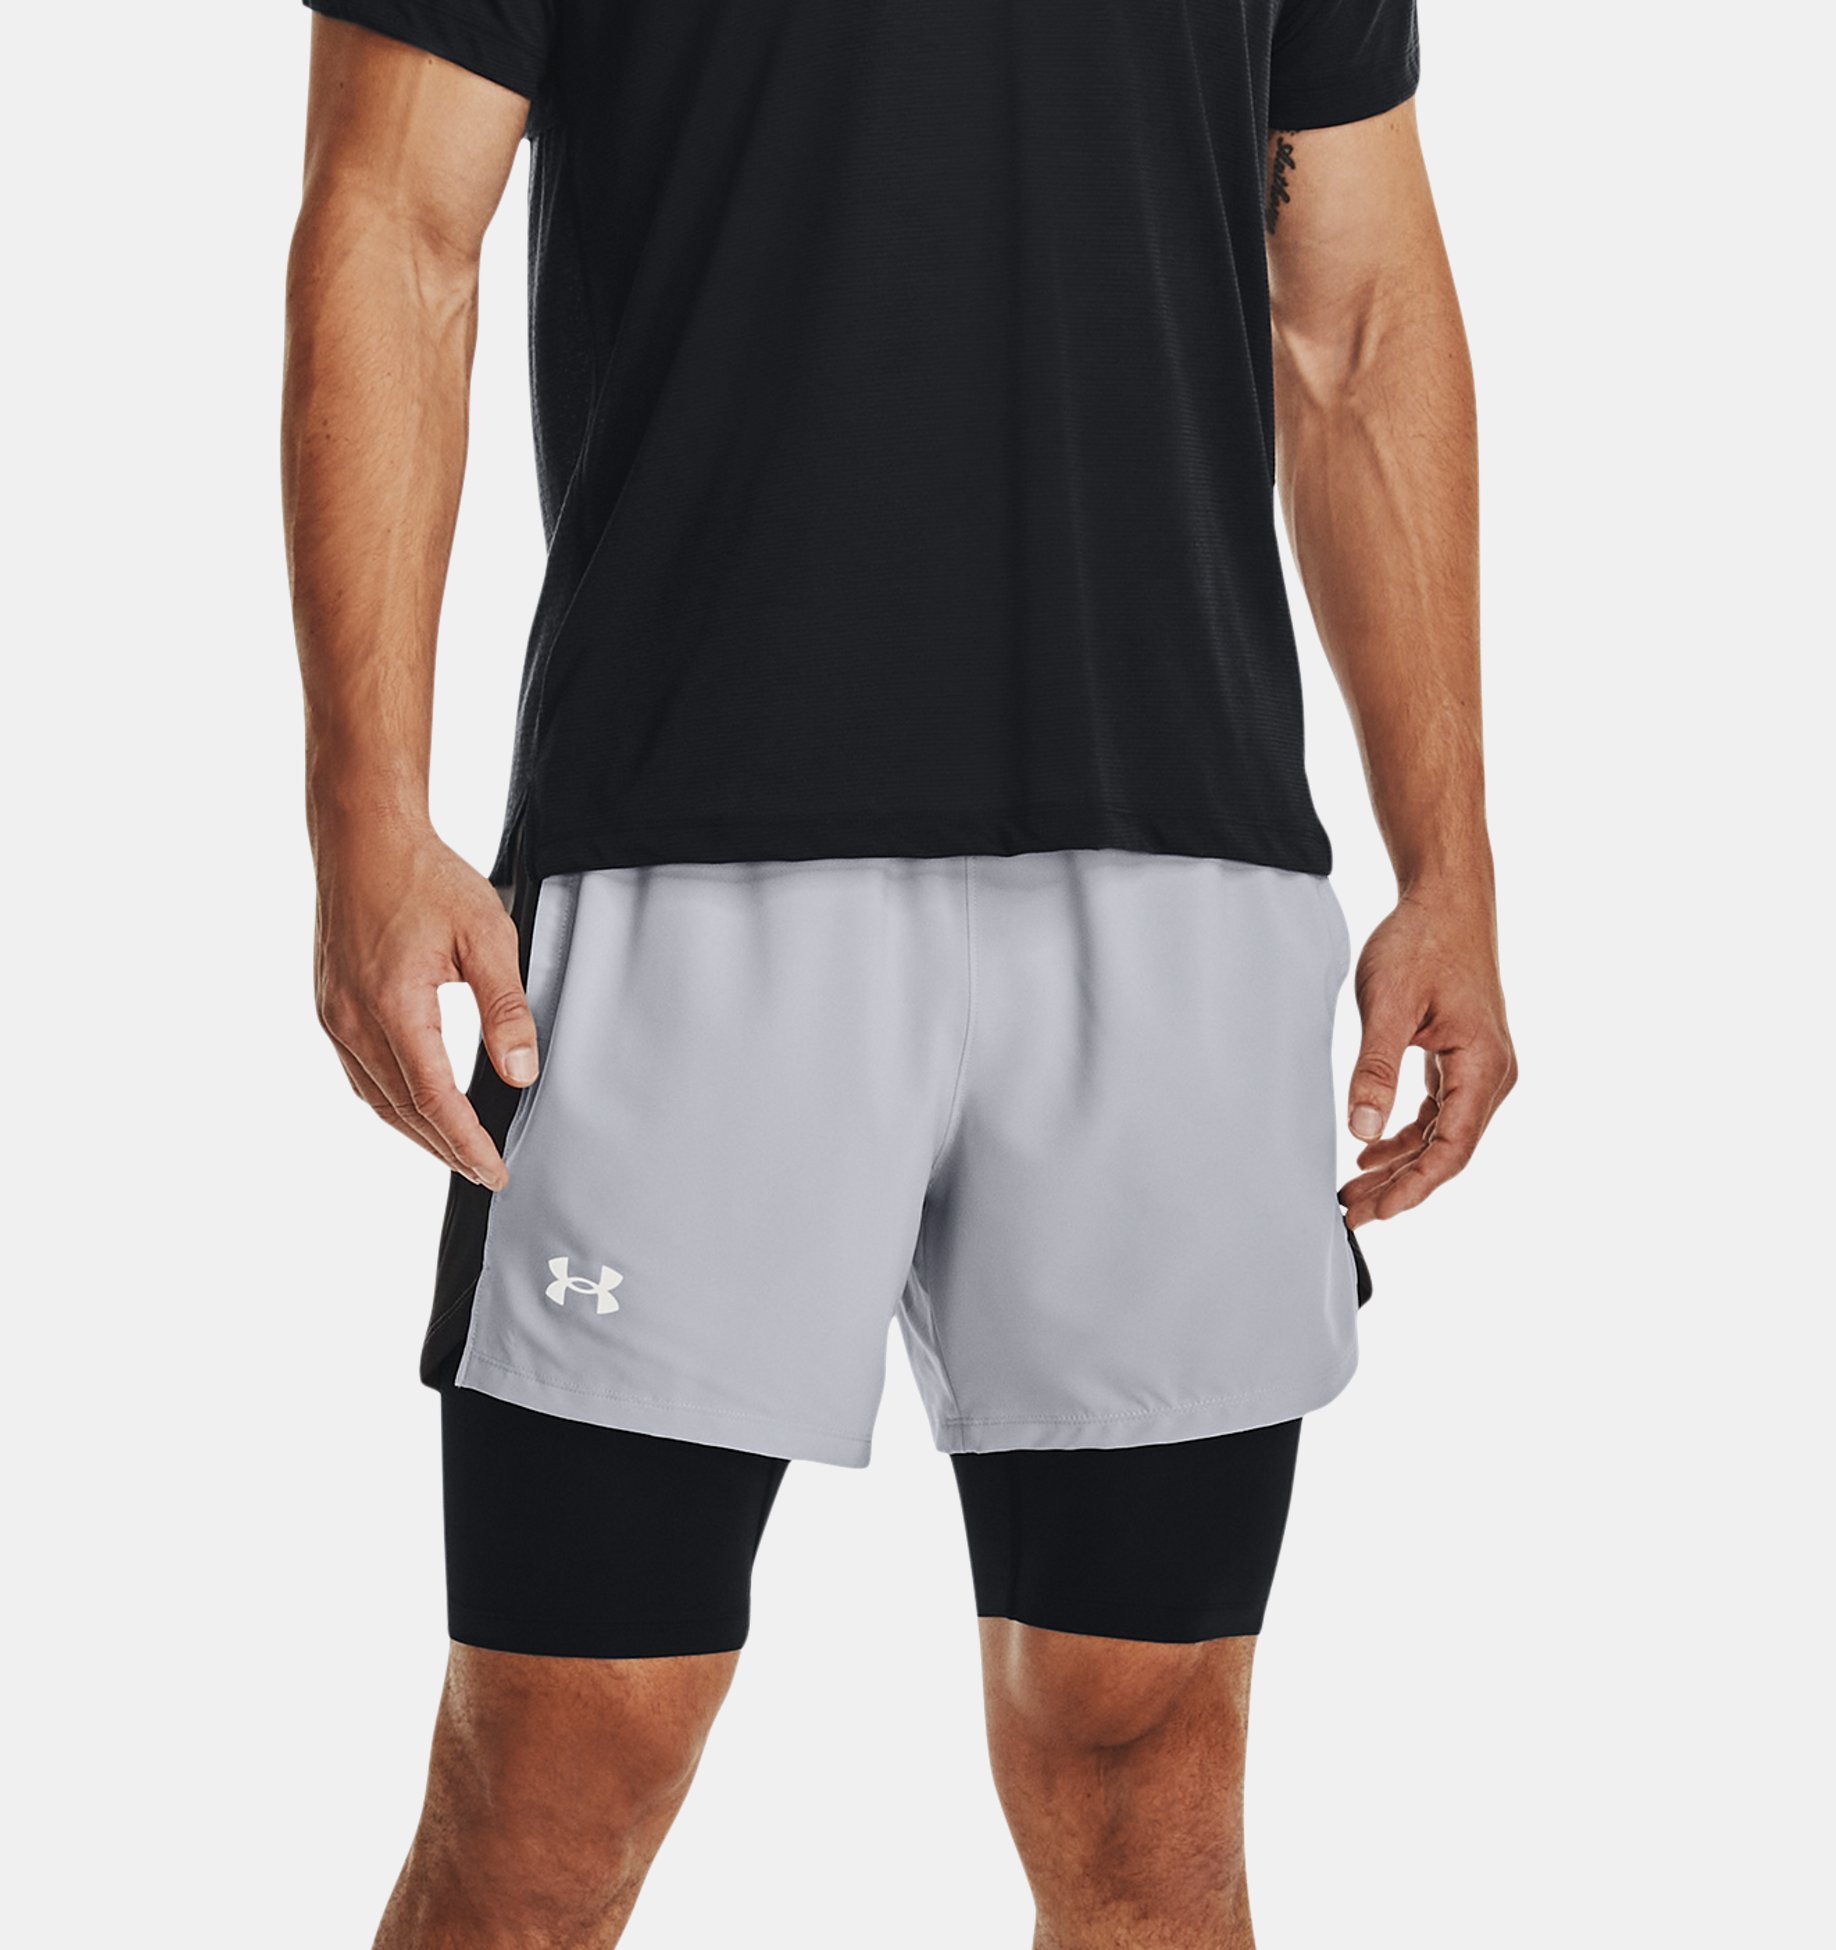 Launch 5'' 2-in-1 Shorts | Under Armour